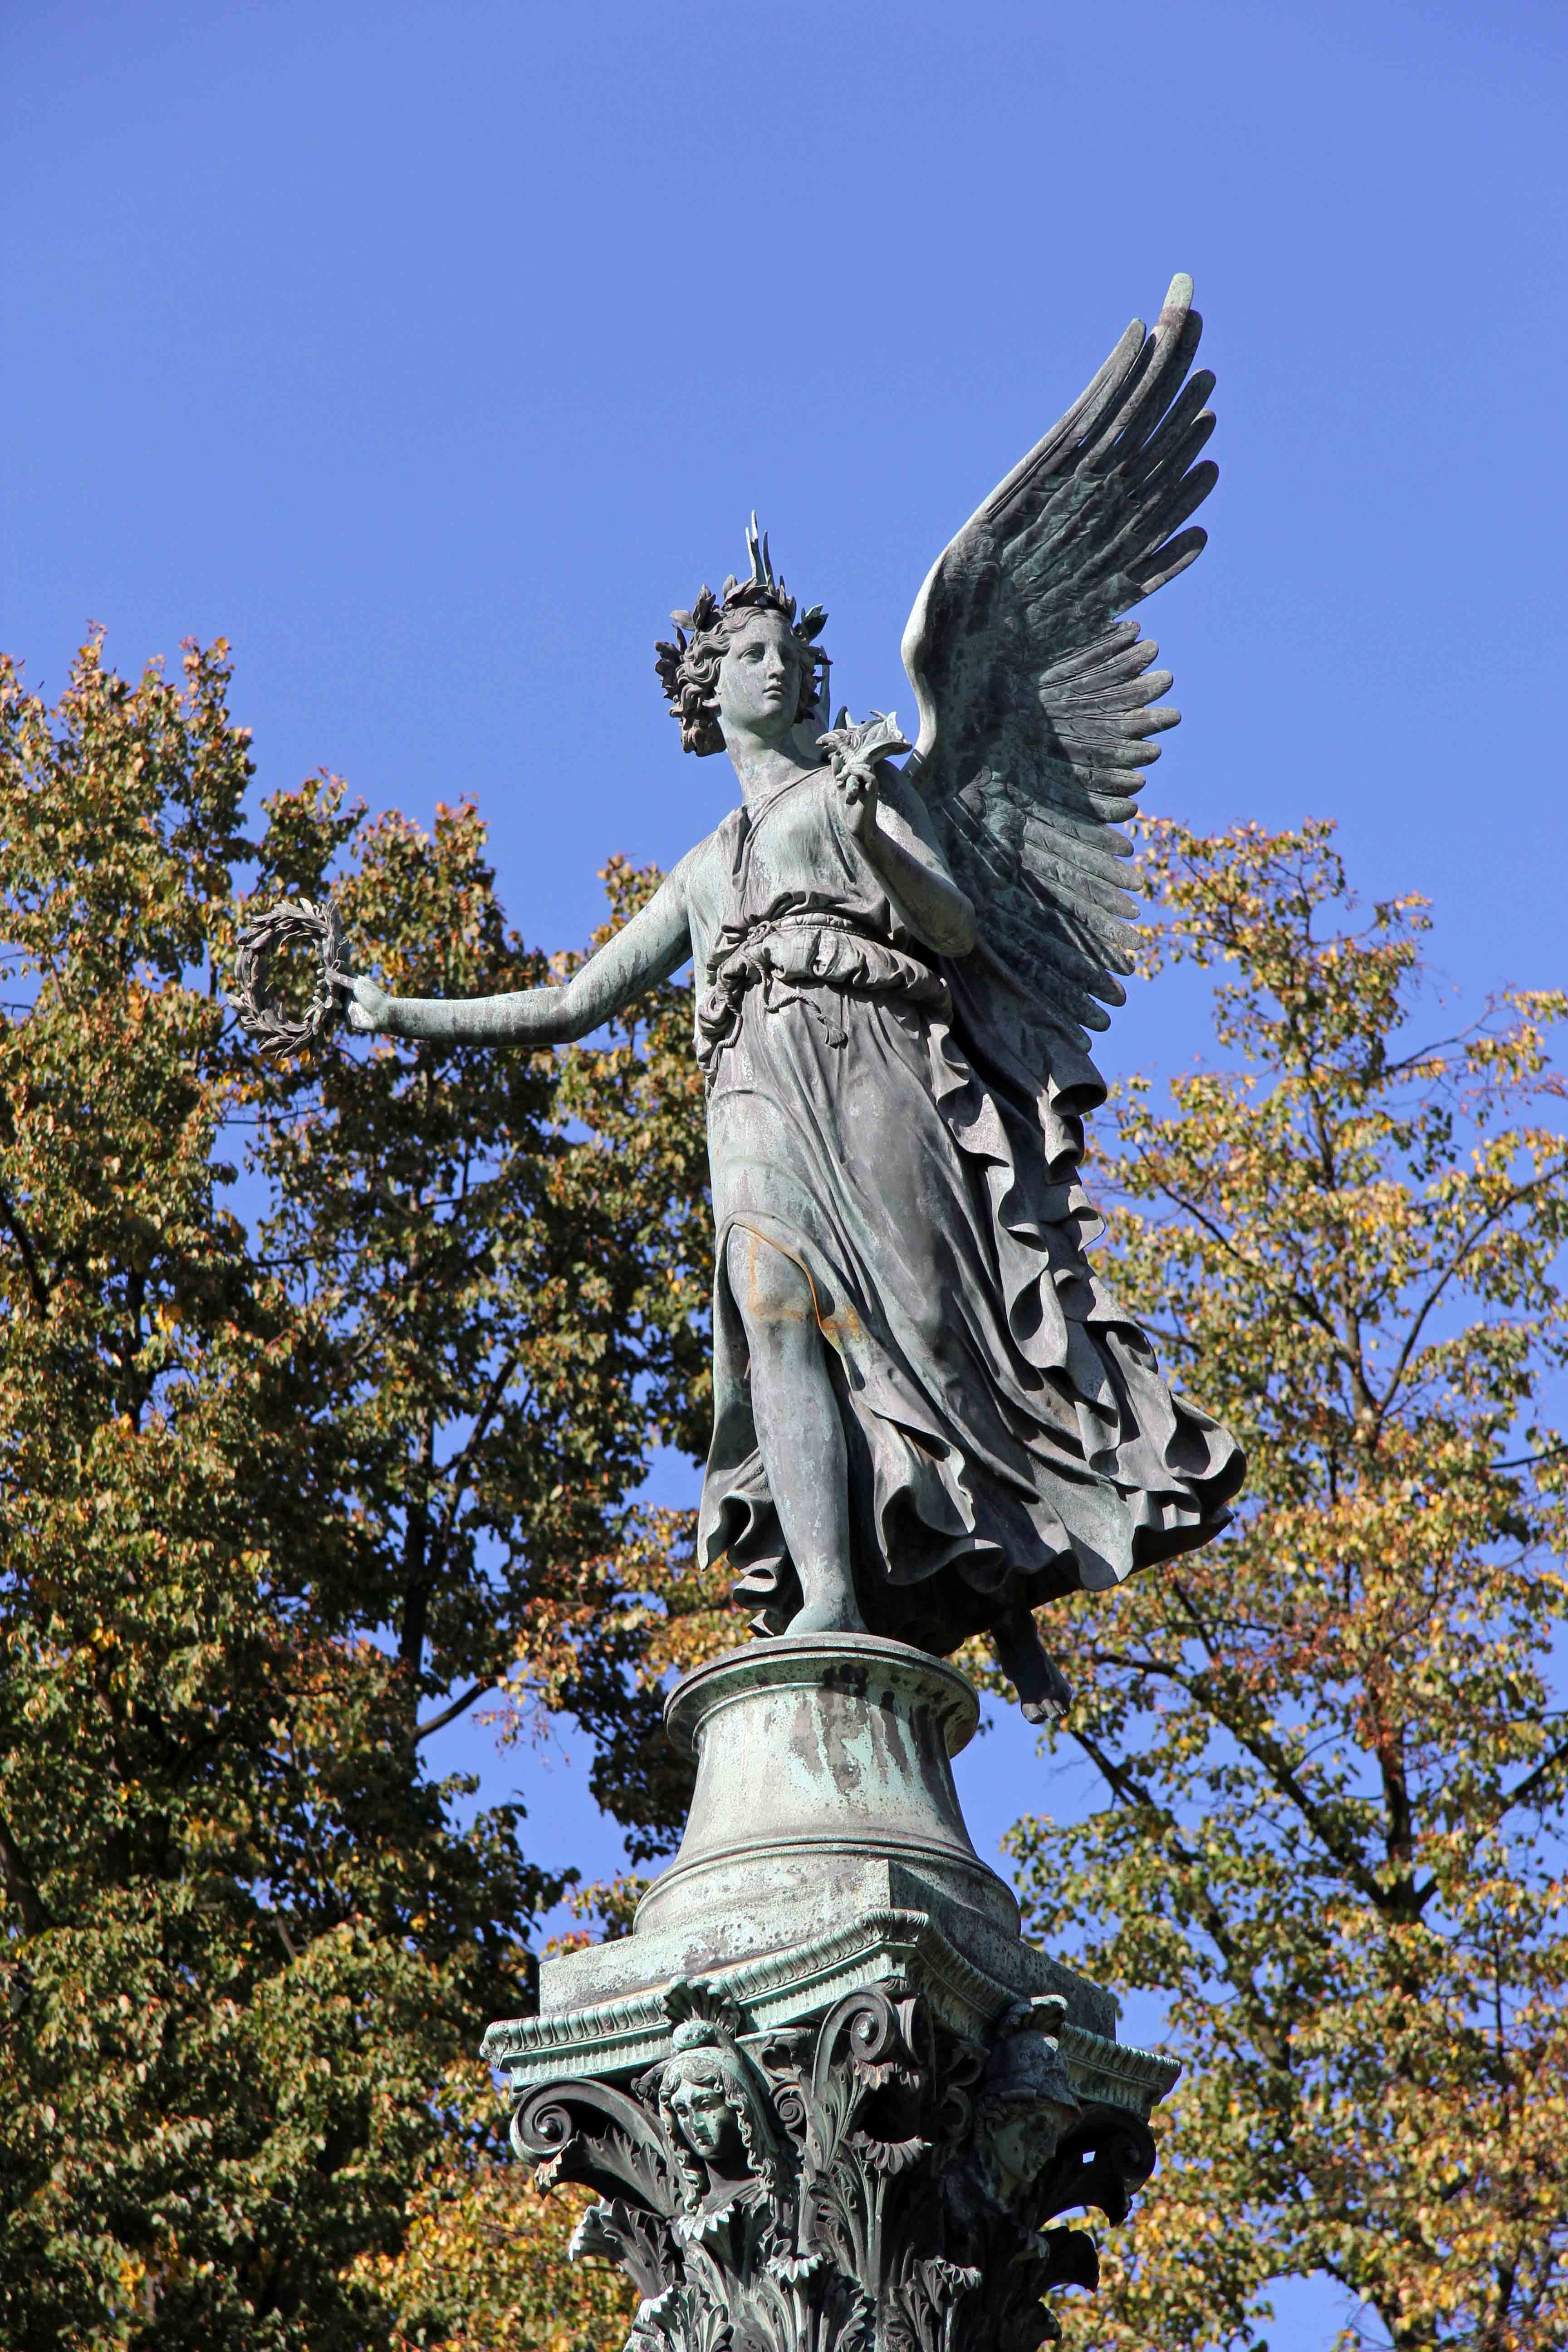 An Angel Statue in the grounds of Schloss Charlottenburg in Berlin